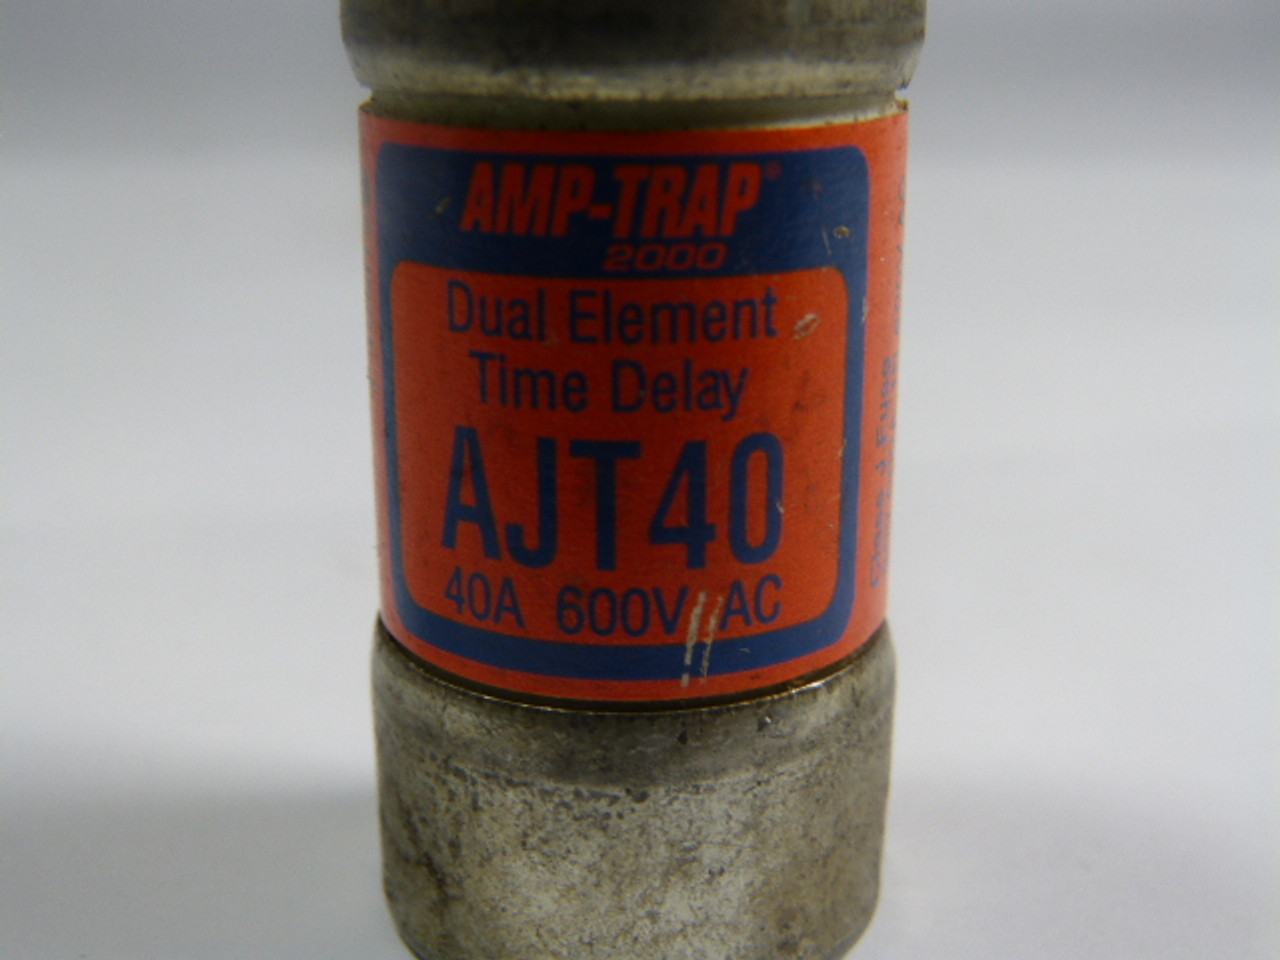 Amp-Trap AJT40 Dual Element Time Delay Fuse 40A 600V USED